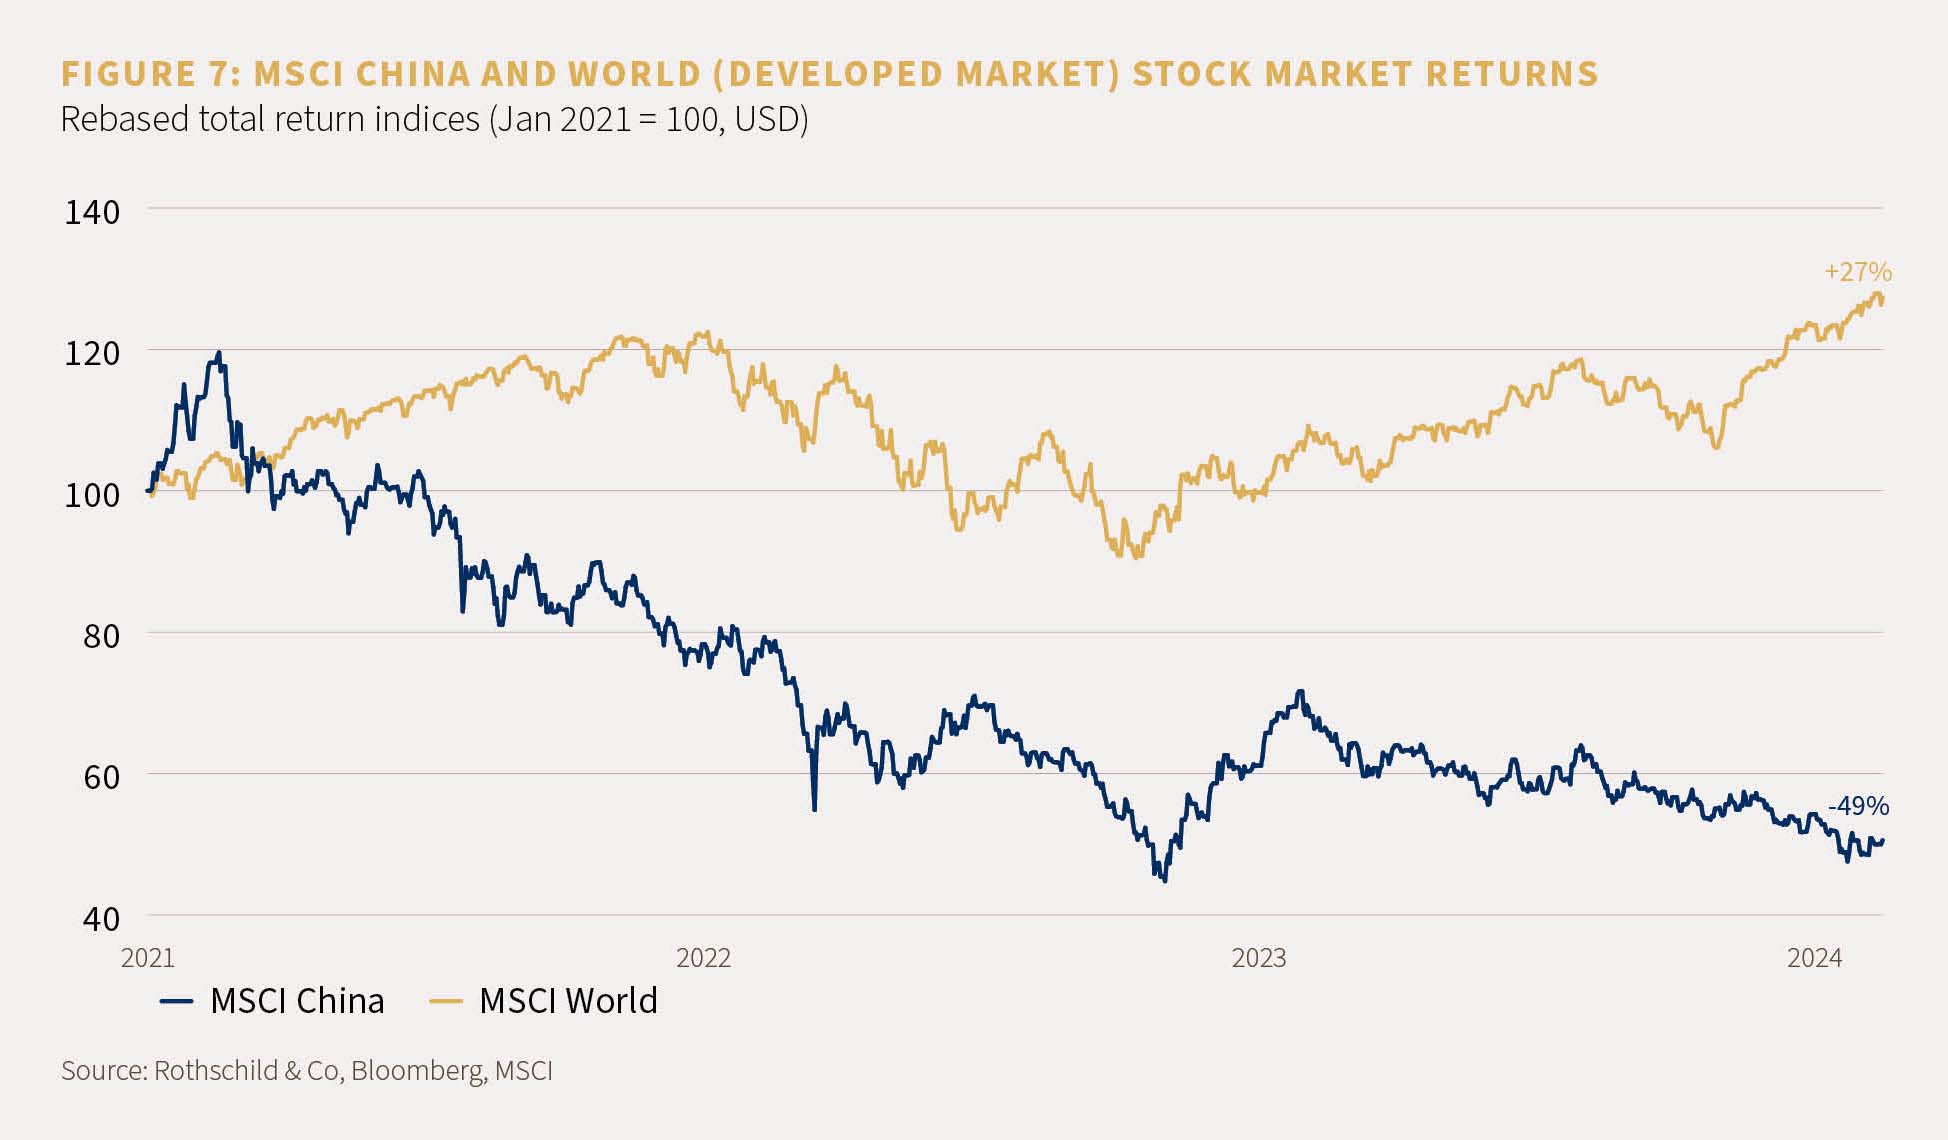 MSCI World stock market returns are at +27%, whilst MSCI China's are at -49%